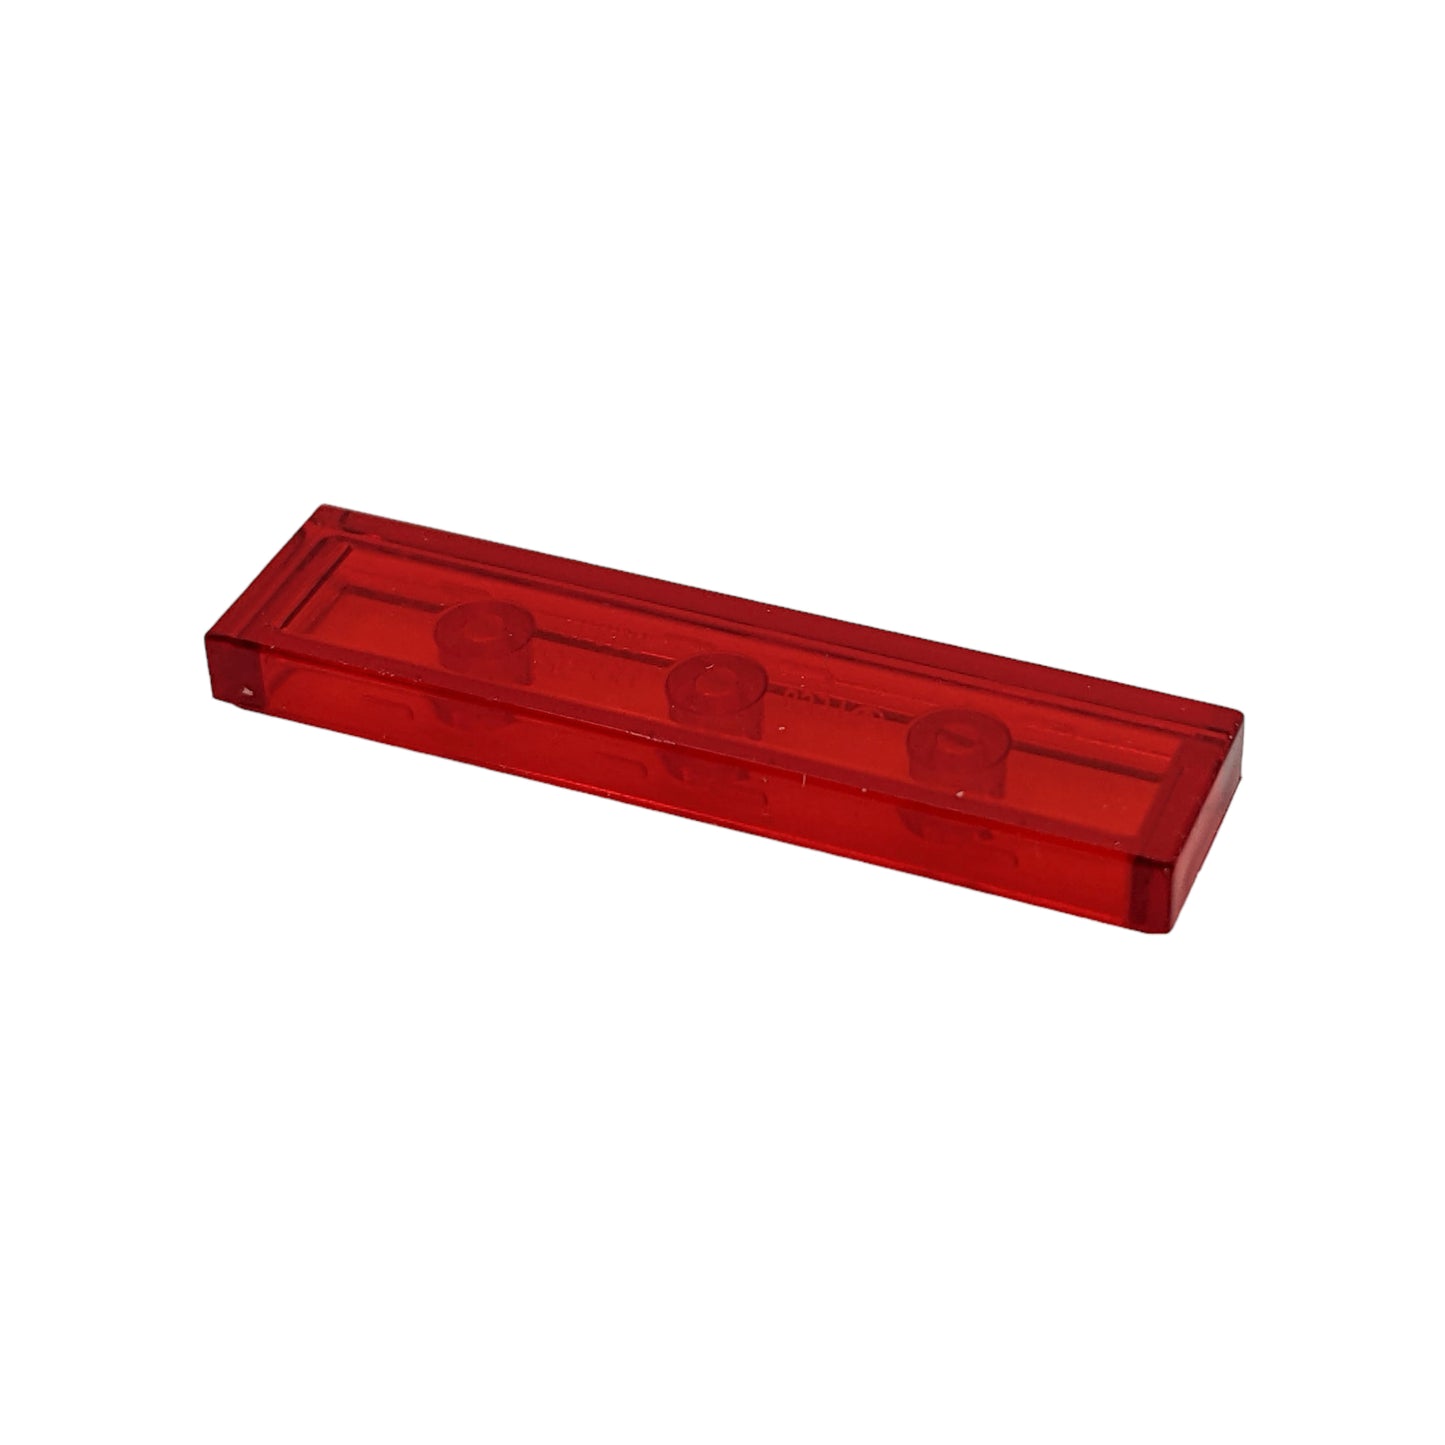 LEGO Tile 1x4 - in Trans-Red